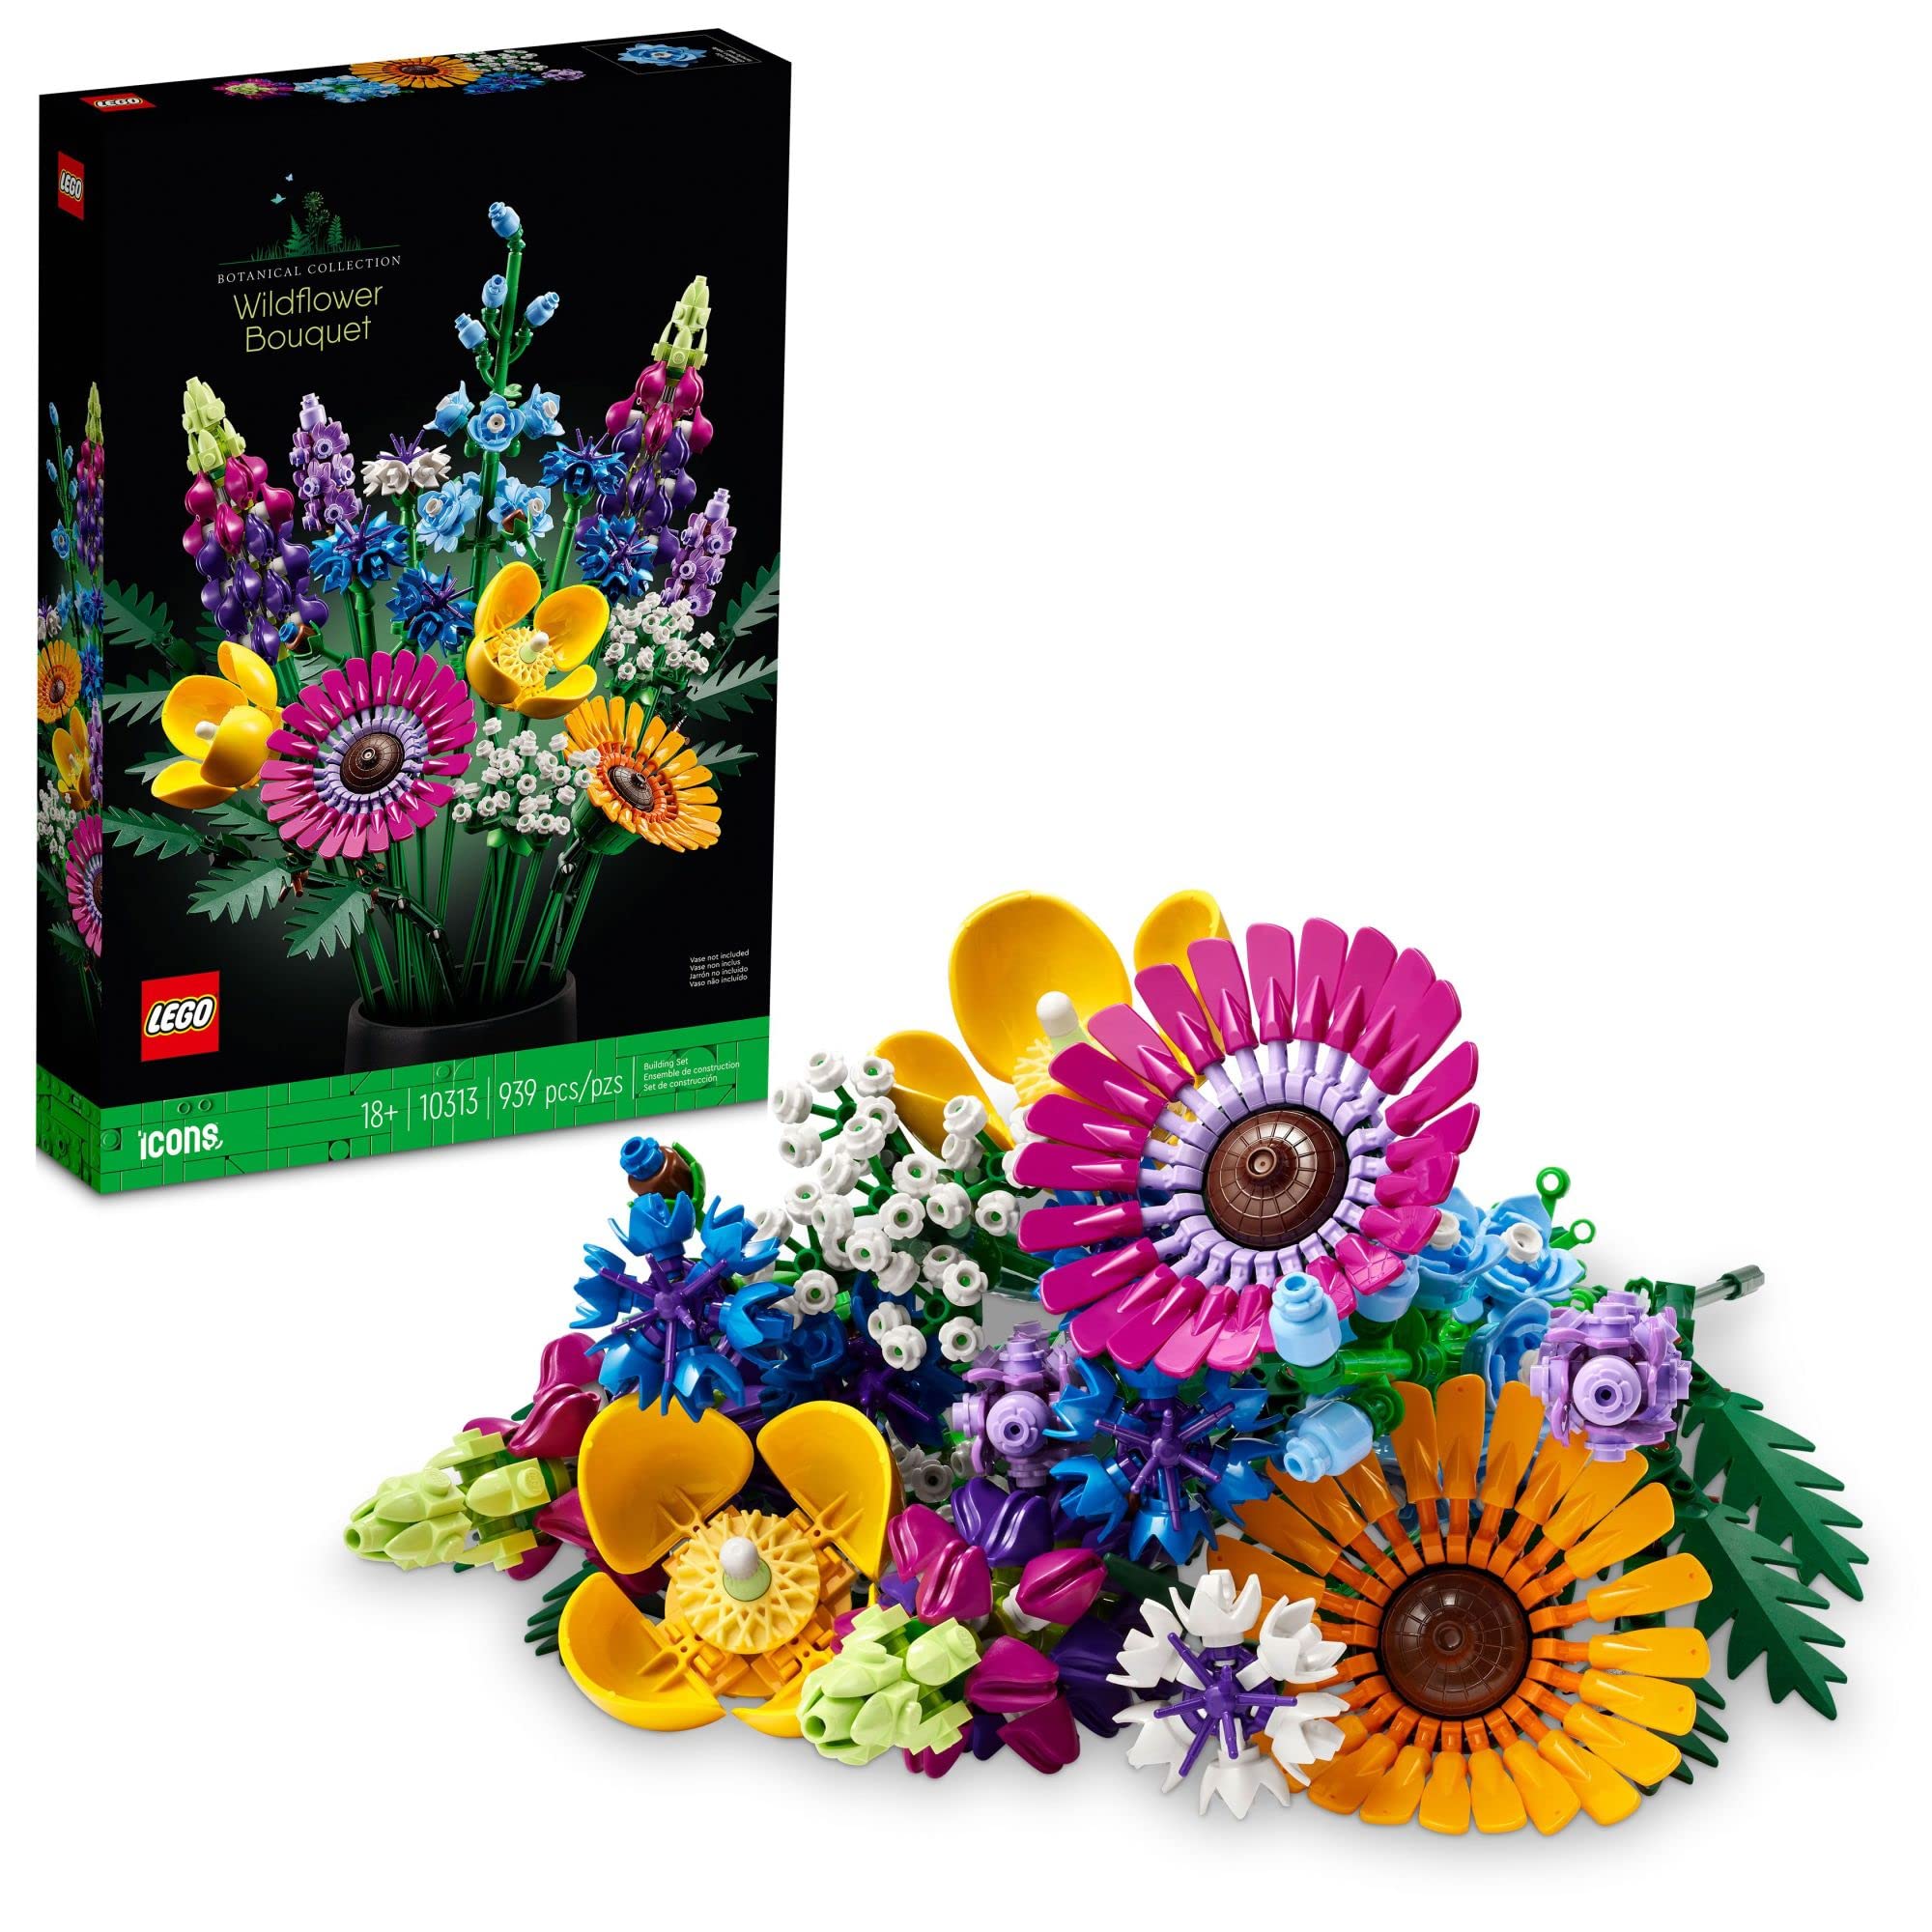 LEGO Icons Wildflower Bouquet $44.99 in-store only at Costco Wholesale. YMMV